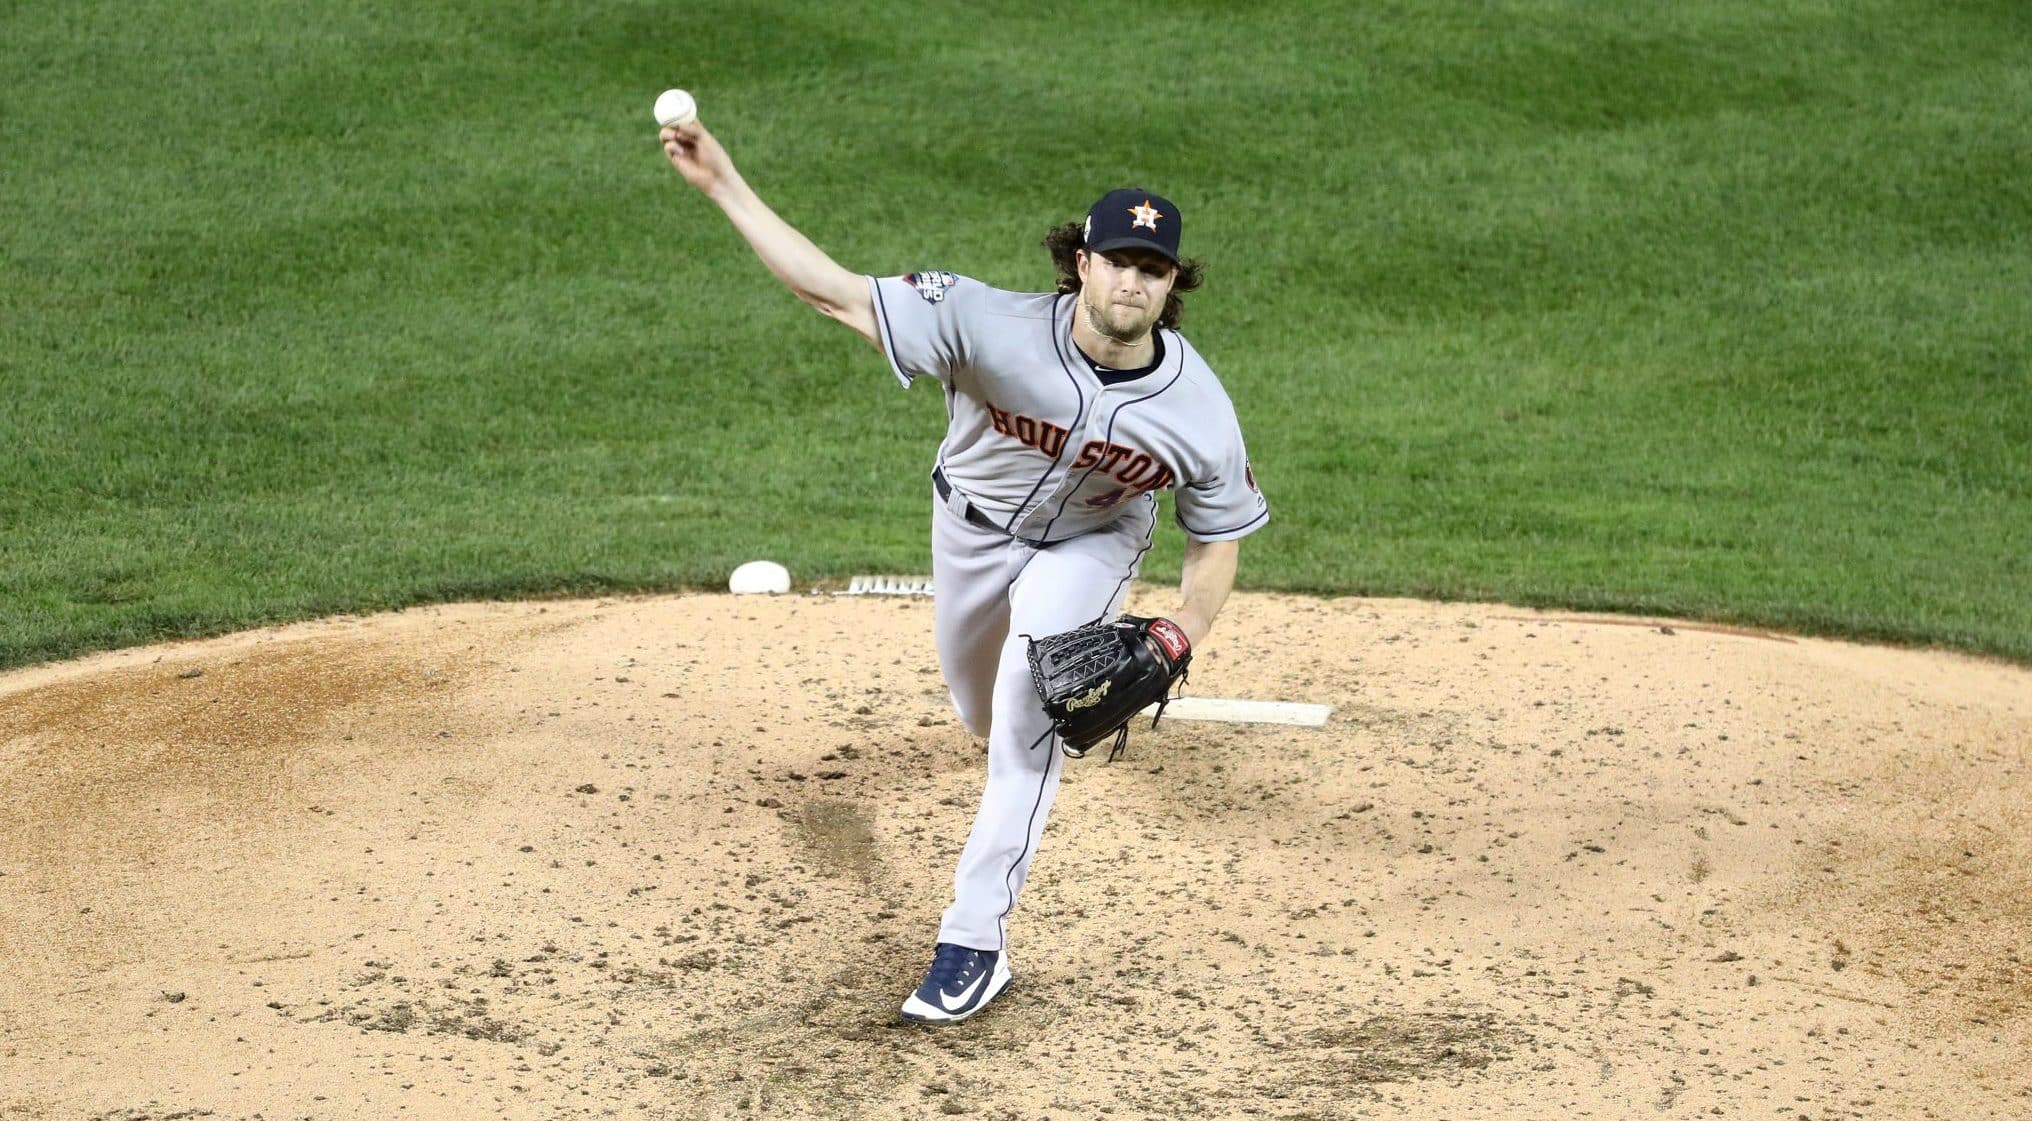 WASHINGTON, DC - OCTOBER 27: Gerrit Cole #45 of the Houston Astros delivers the pitch against the Washington Nationals during the fourth inning in Game Five of the 2019 World Series at Nationals Park on October 27, 2019 in Washington, DC.